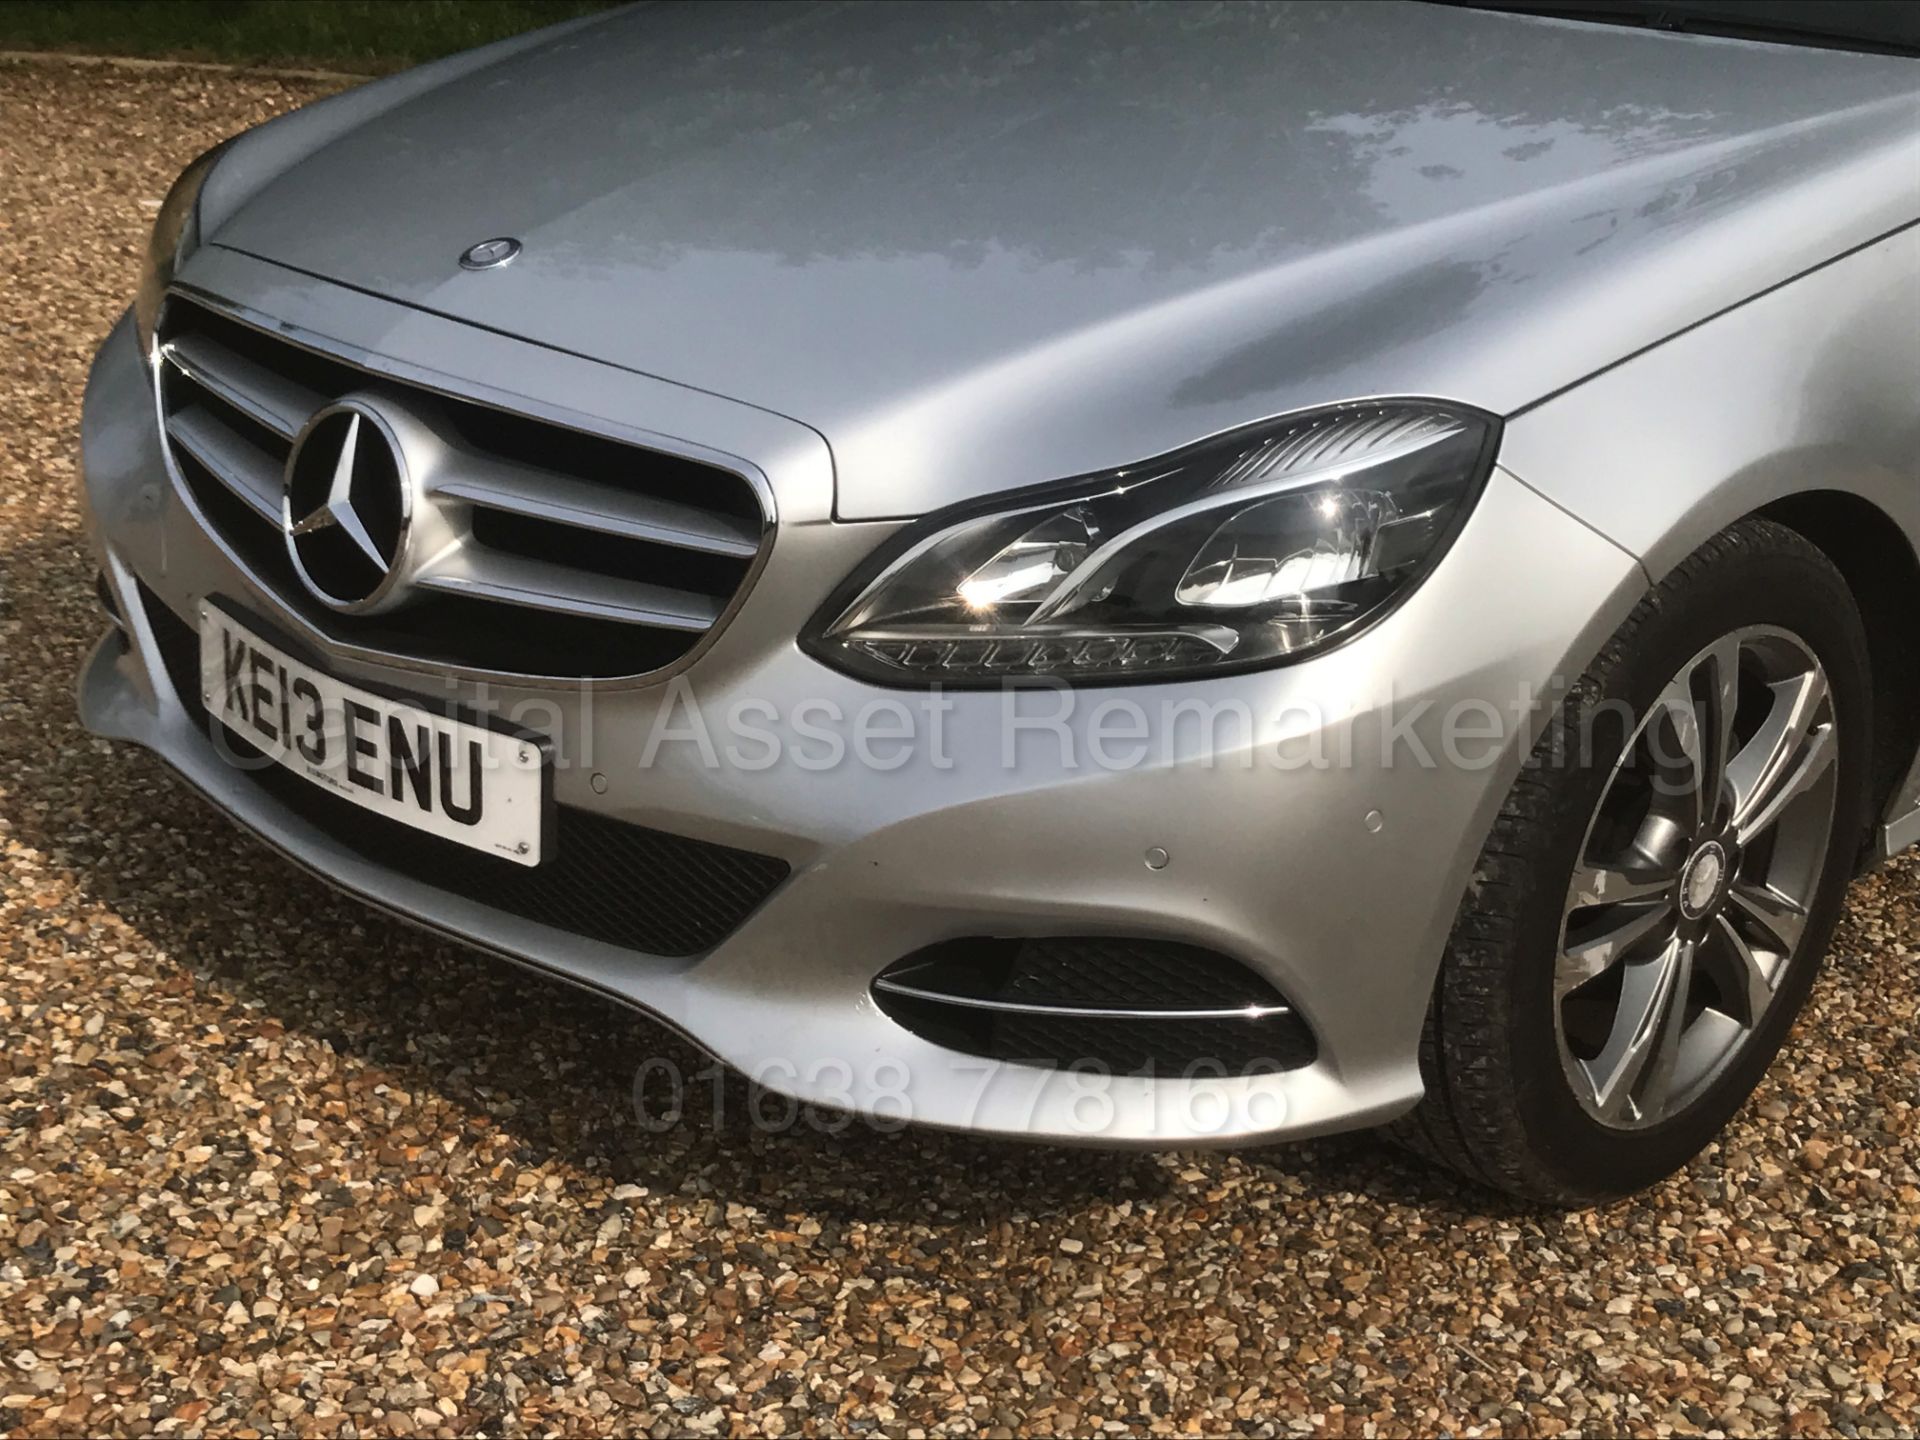 (On Sale) MERCEDES-BENZ E220 CDI *SALOON* (2013 - NEW MODEL) '7G TRONIC AUTO - LEATHER - SAT NAV' - Image 14 of 39